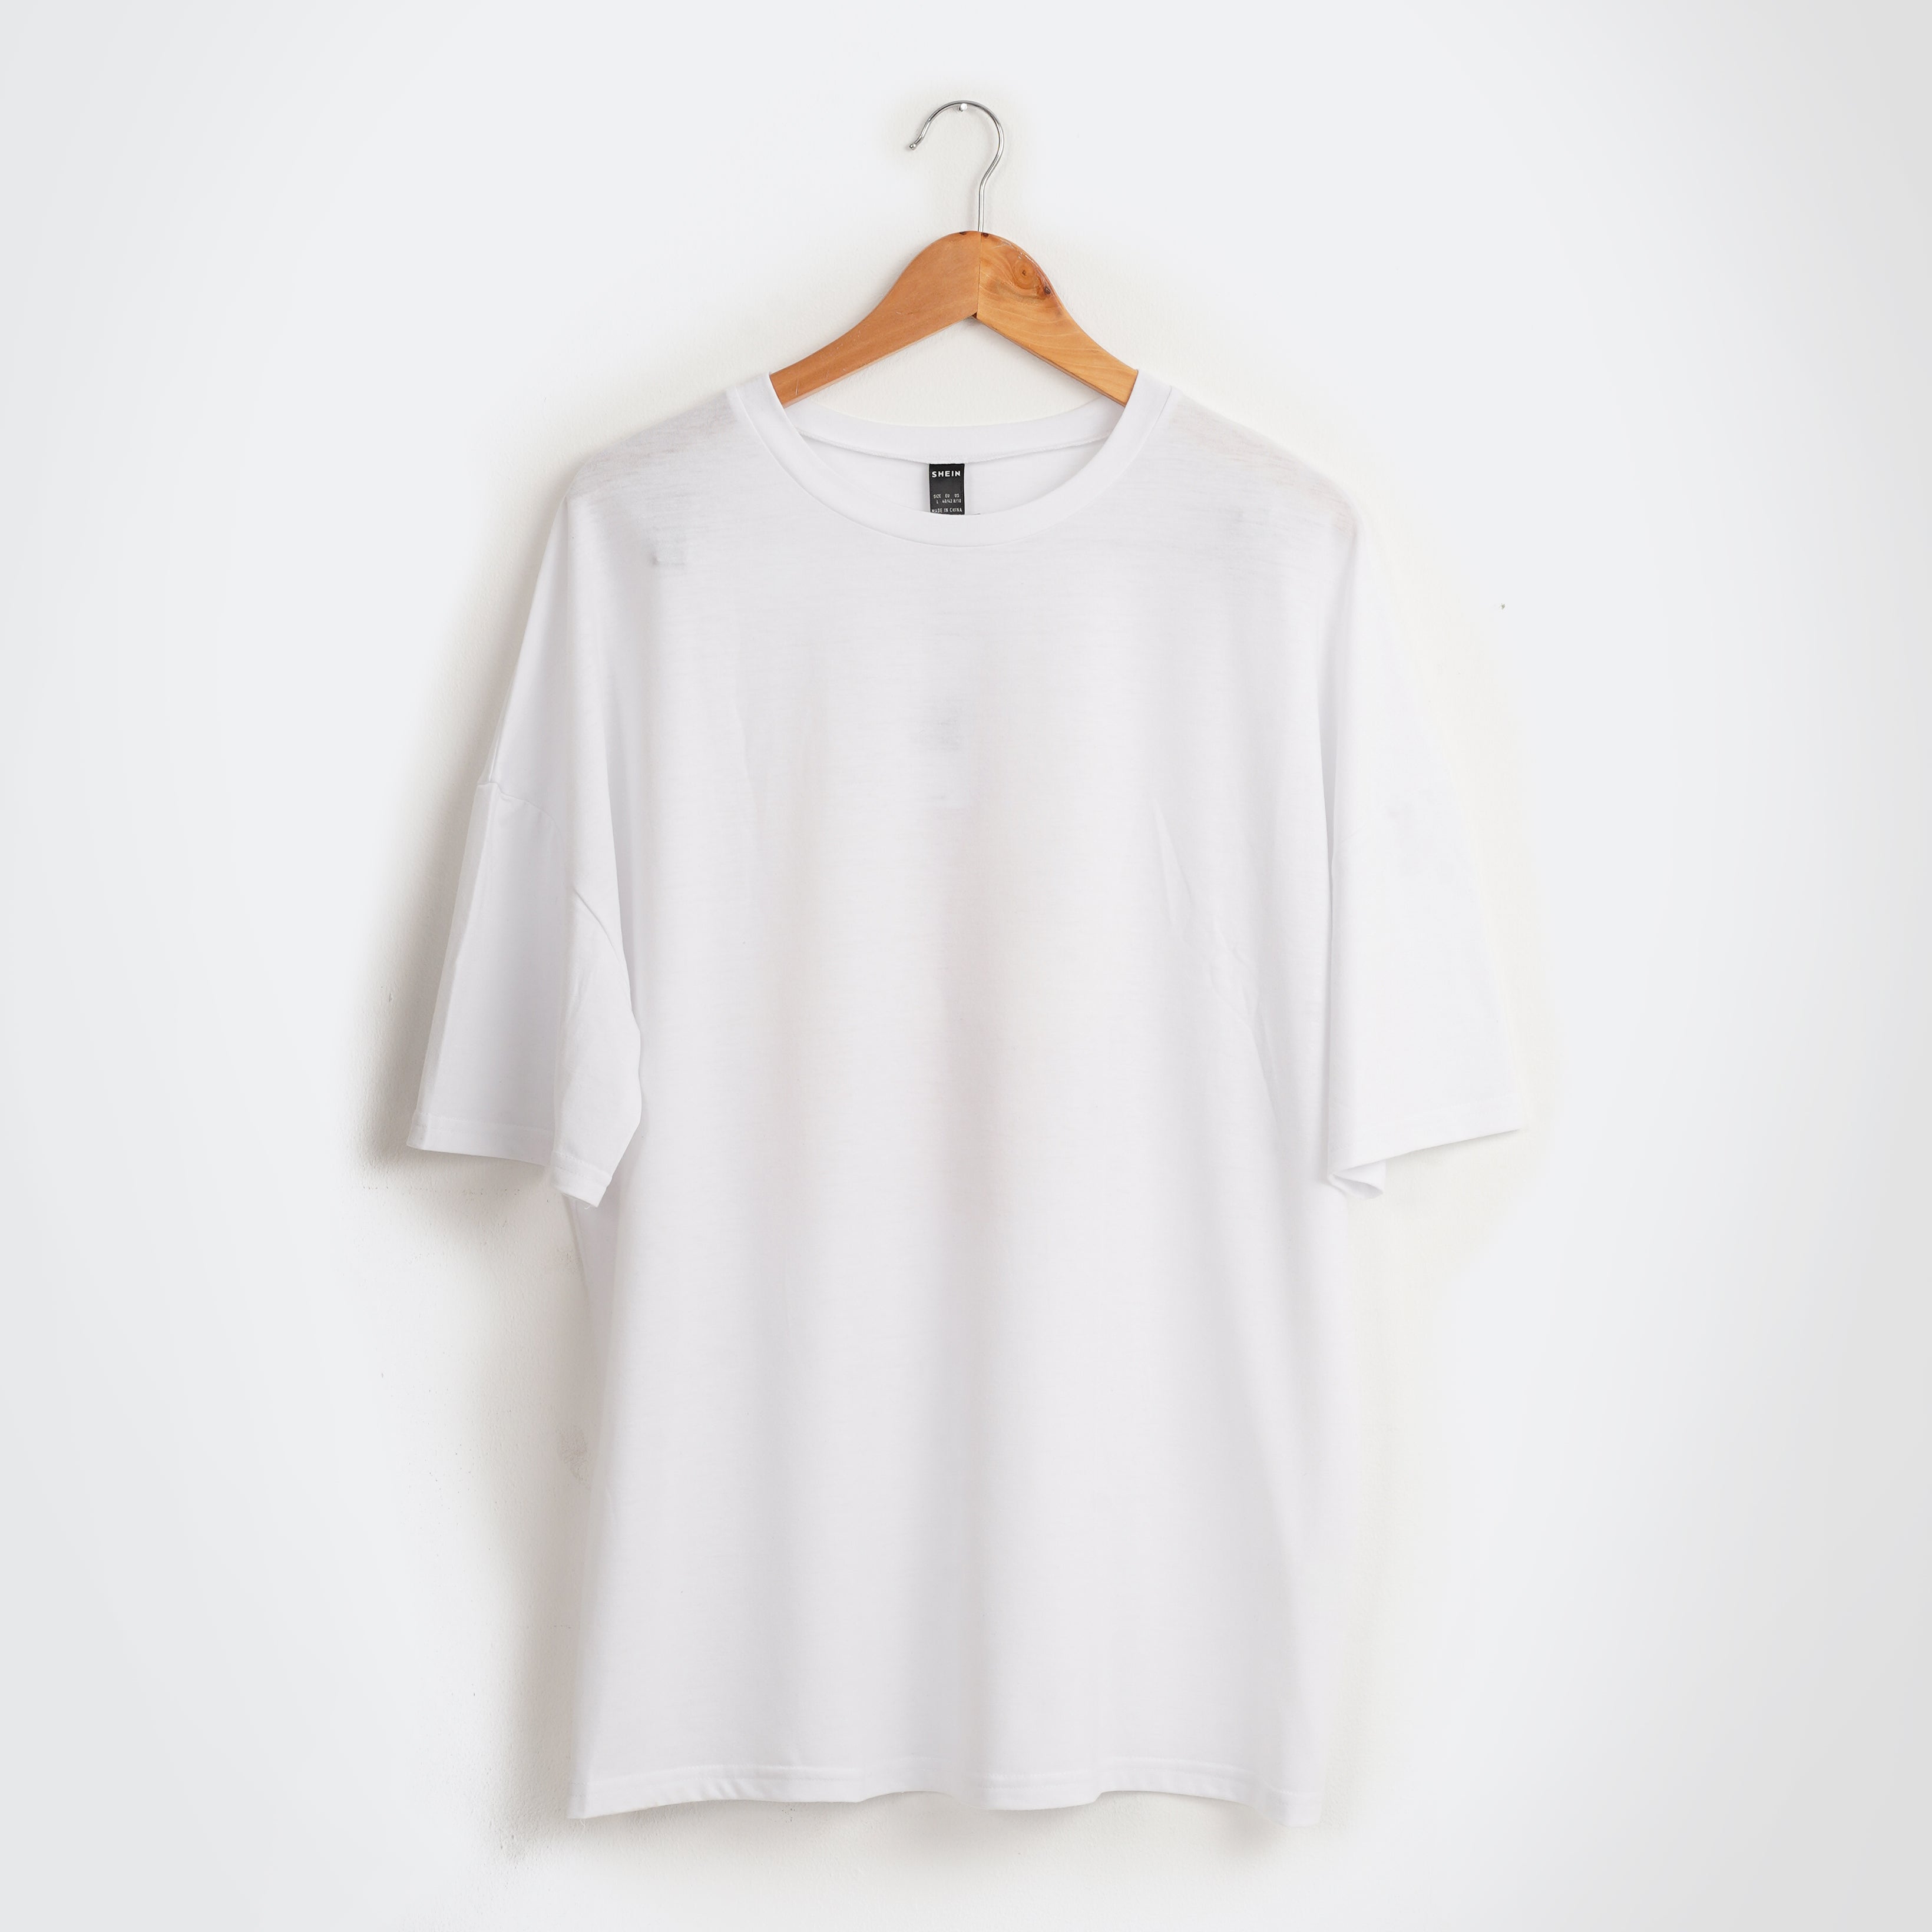 Over Sized printed Tee - Marca Deals - Shein